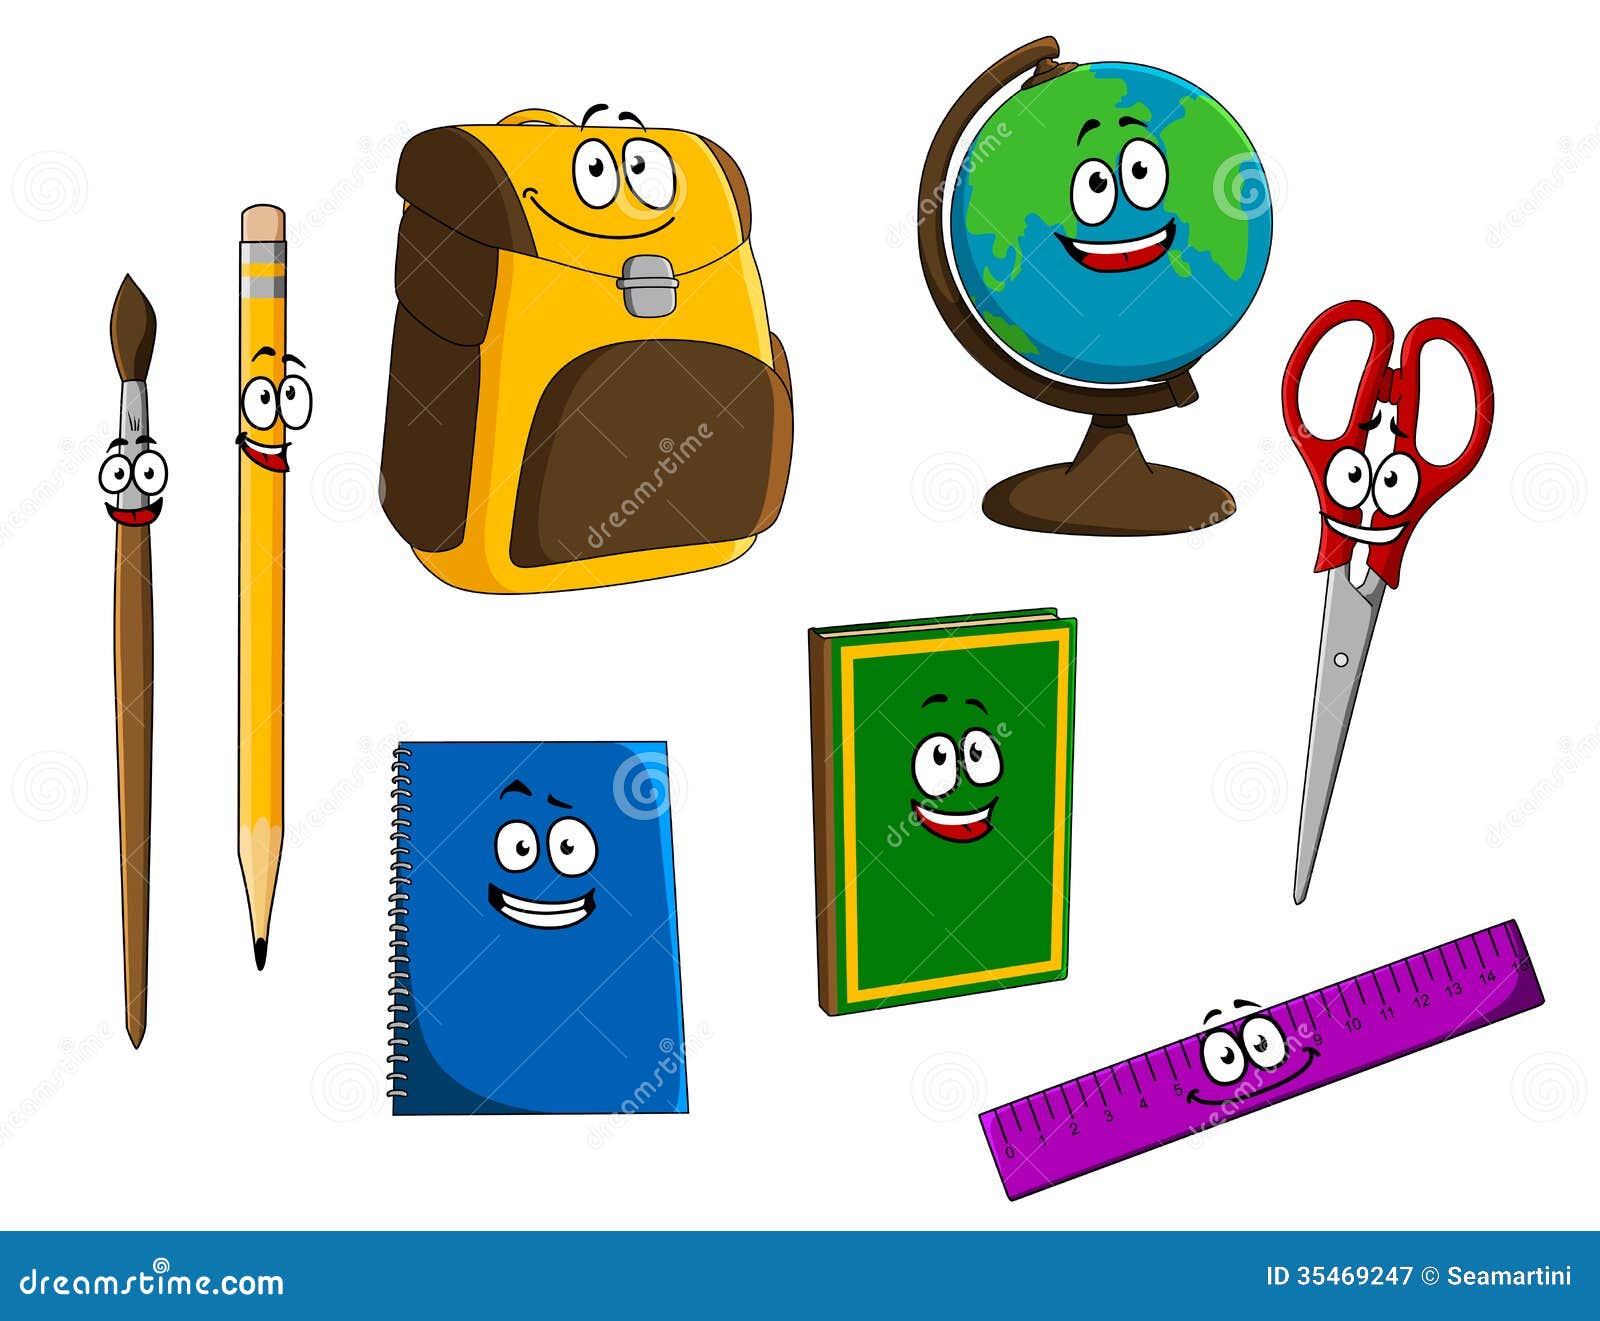 clipart school things - photo #43